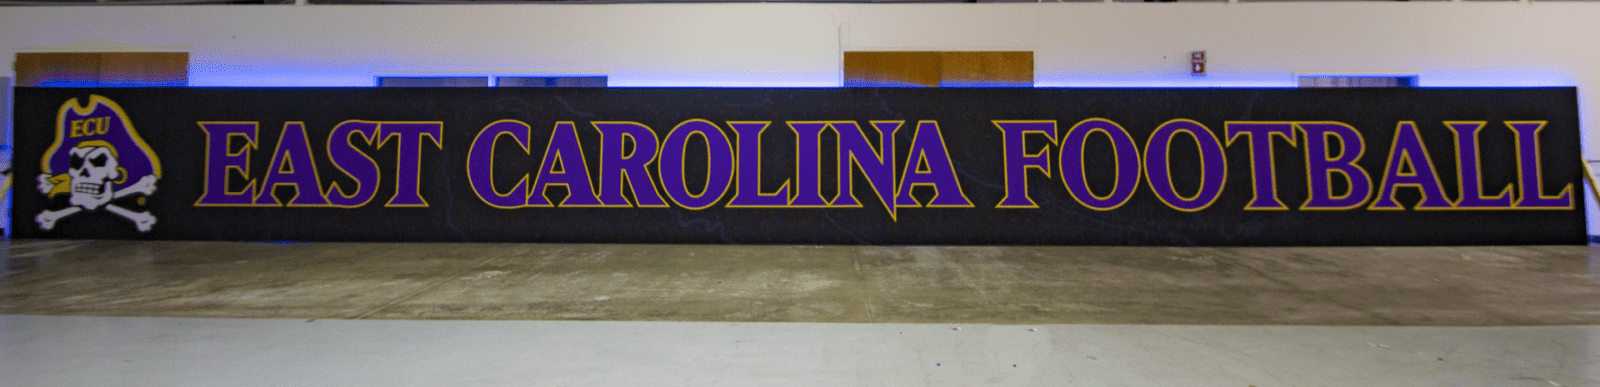 East Carolina RGBW Halo Lit Wall-Mounted Mural that spans 40 feet